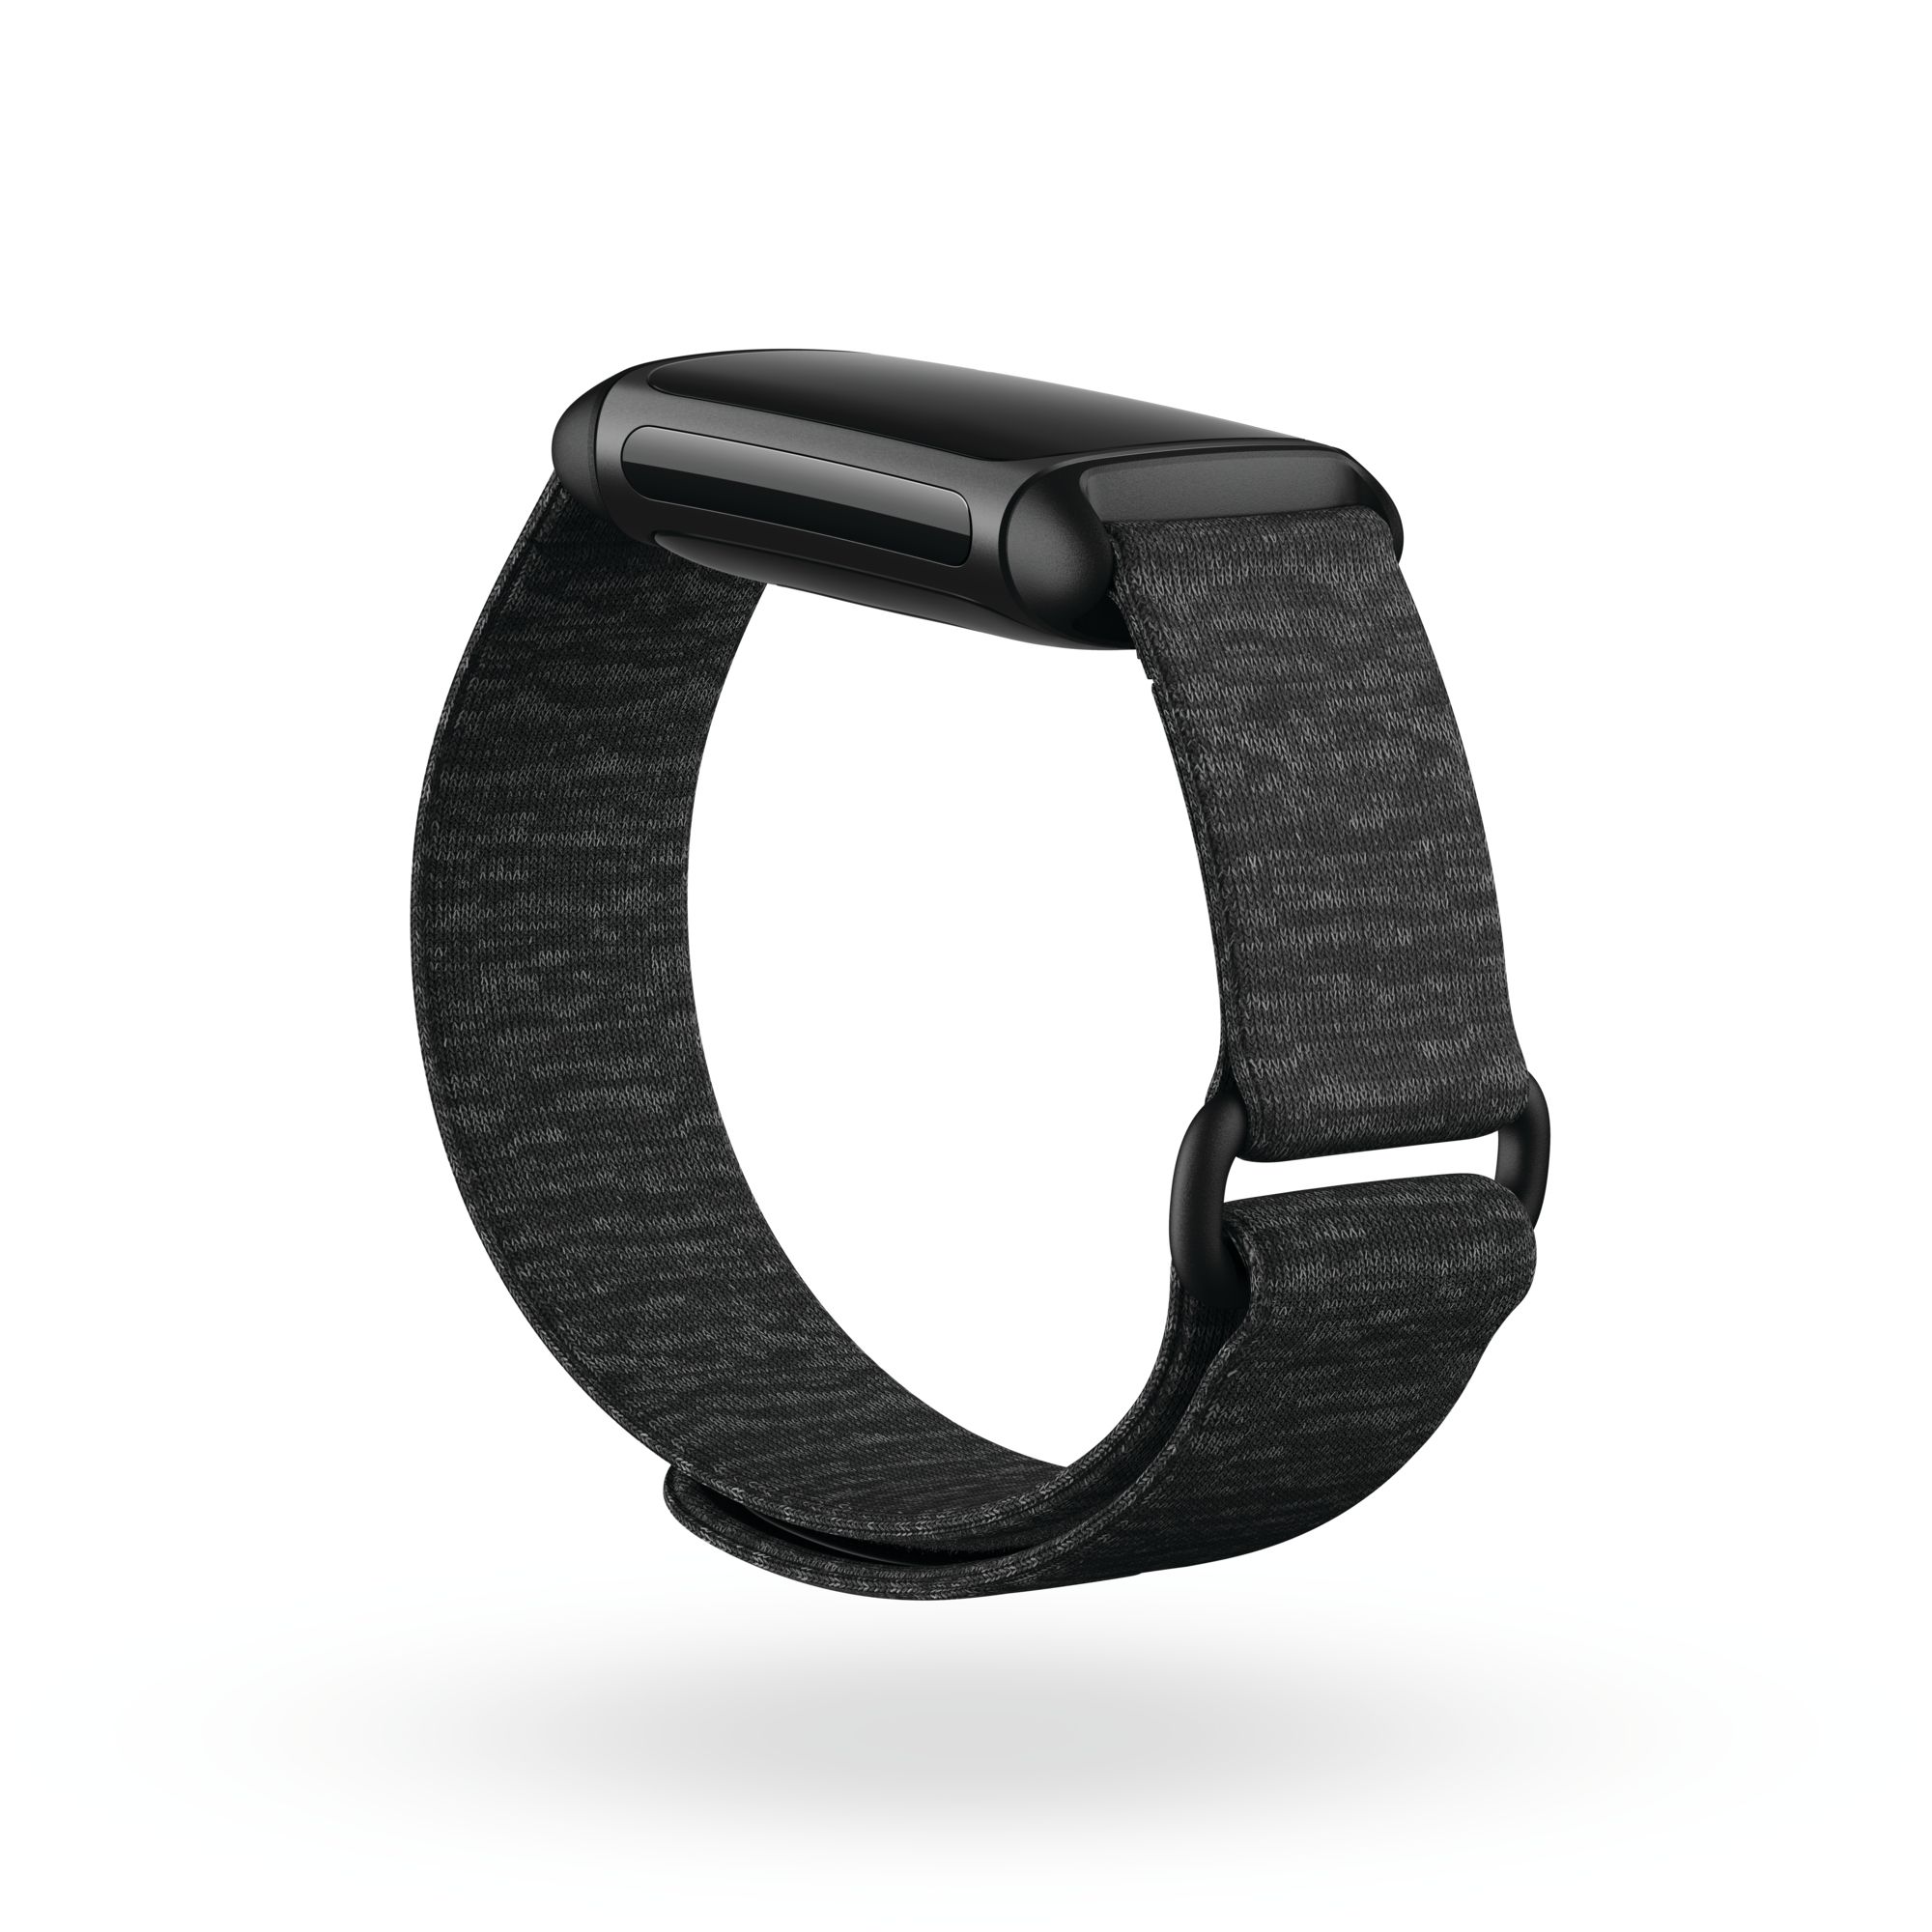 Fitbit Charge 5 review: Supercharged band comes with caveats - Wareable